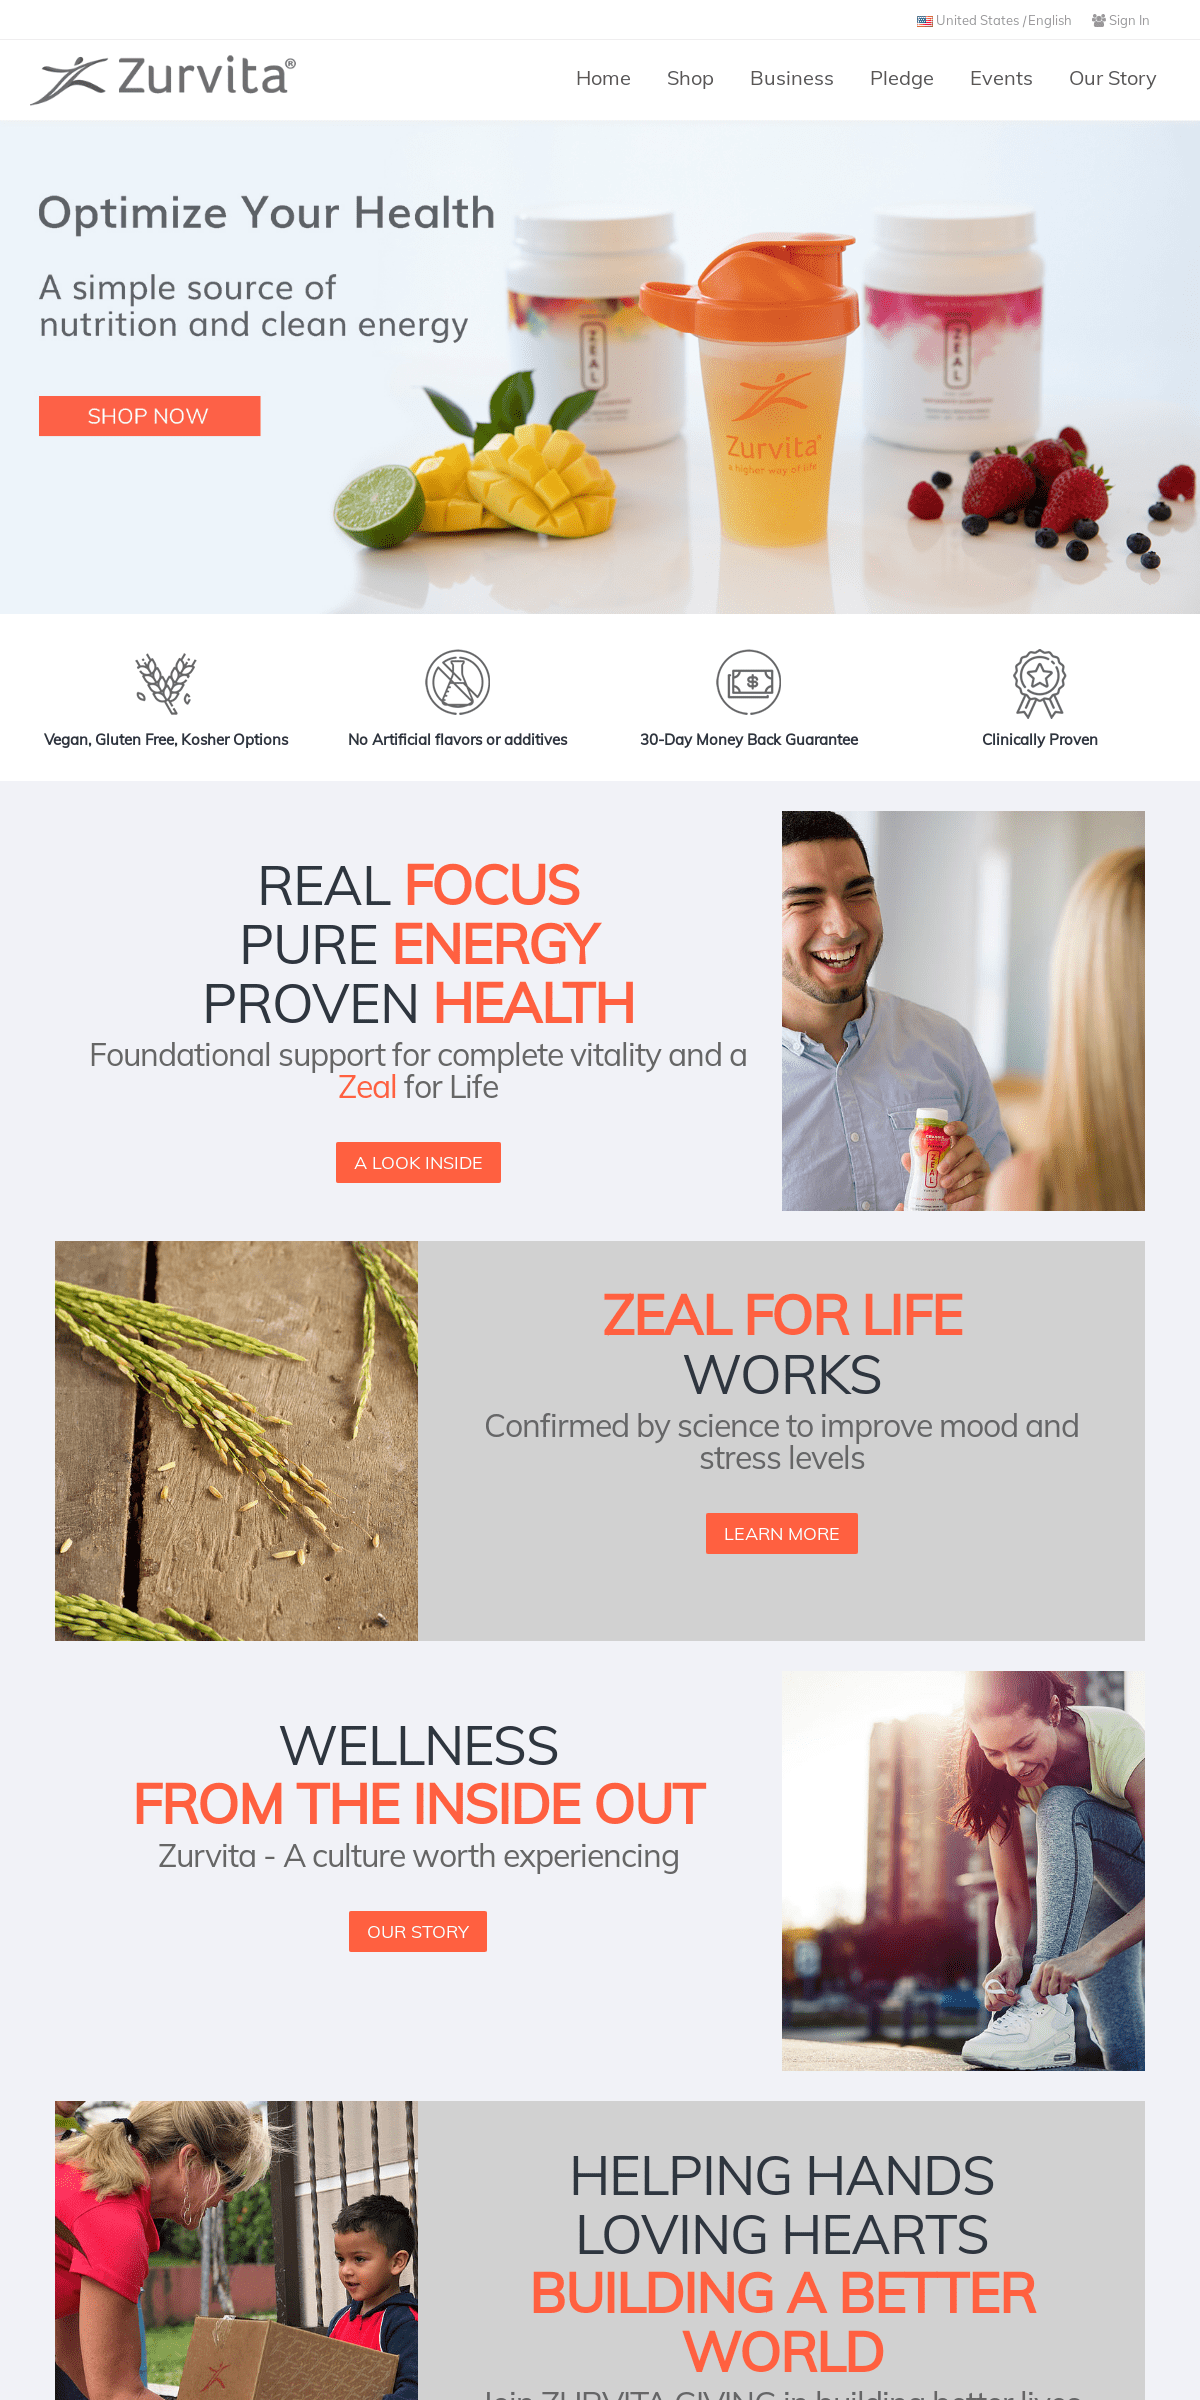 A health and wellness company dedicated to changing lives - Zurvita